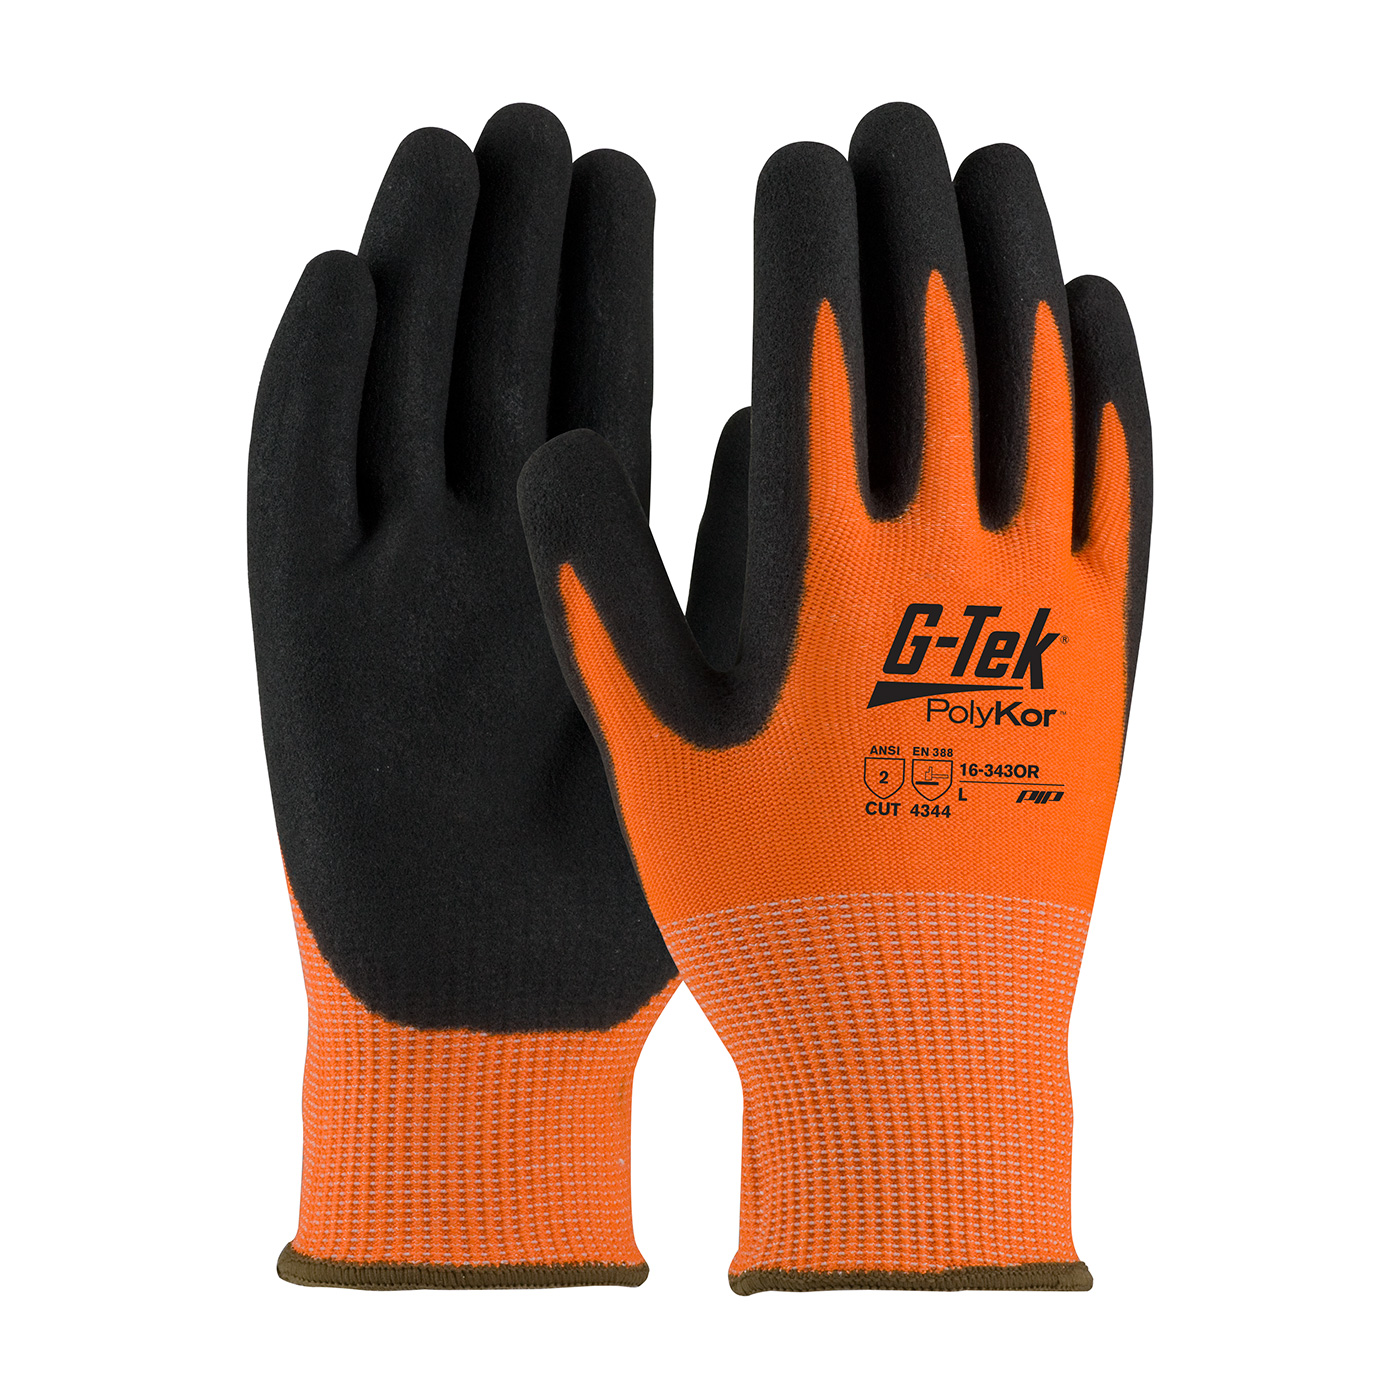 PIP 16-343OR/XL G-Tek PolyKor Hi-Vis Seamless Knit PolyKor Blended Glove with Double-Dipped Nitrile Coated MicroSurface Grip on Palm & Fingers - X-Large PID-16 343OR XL